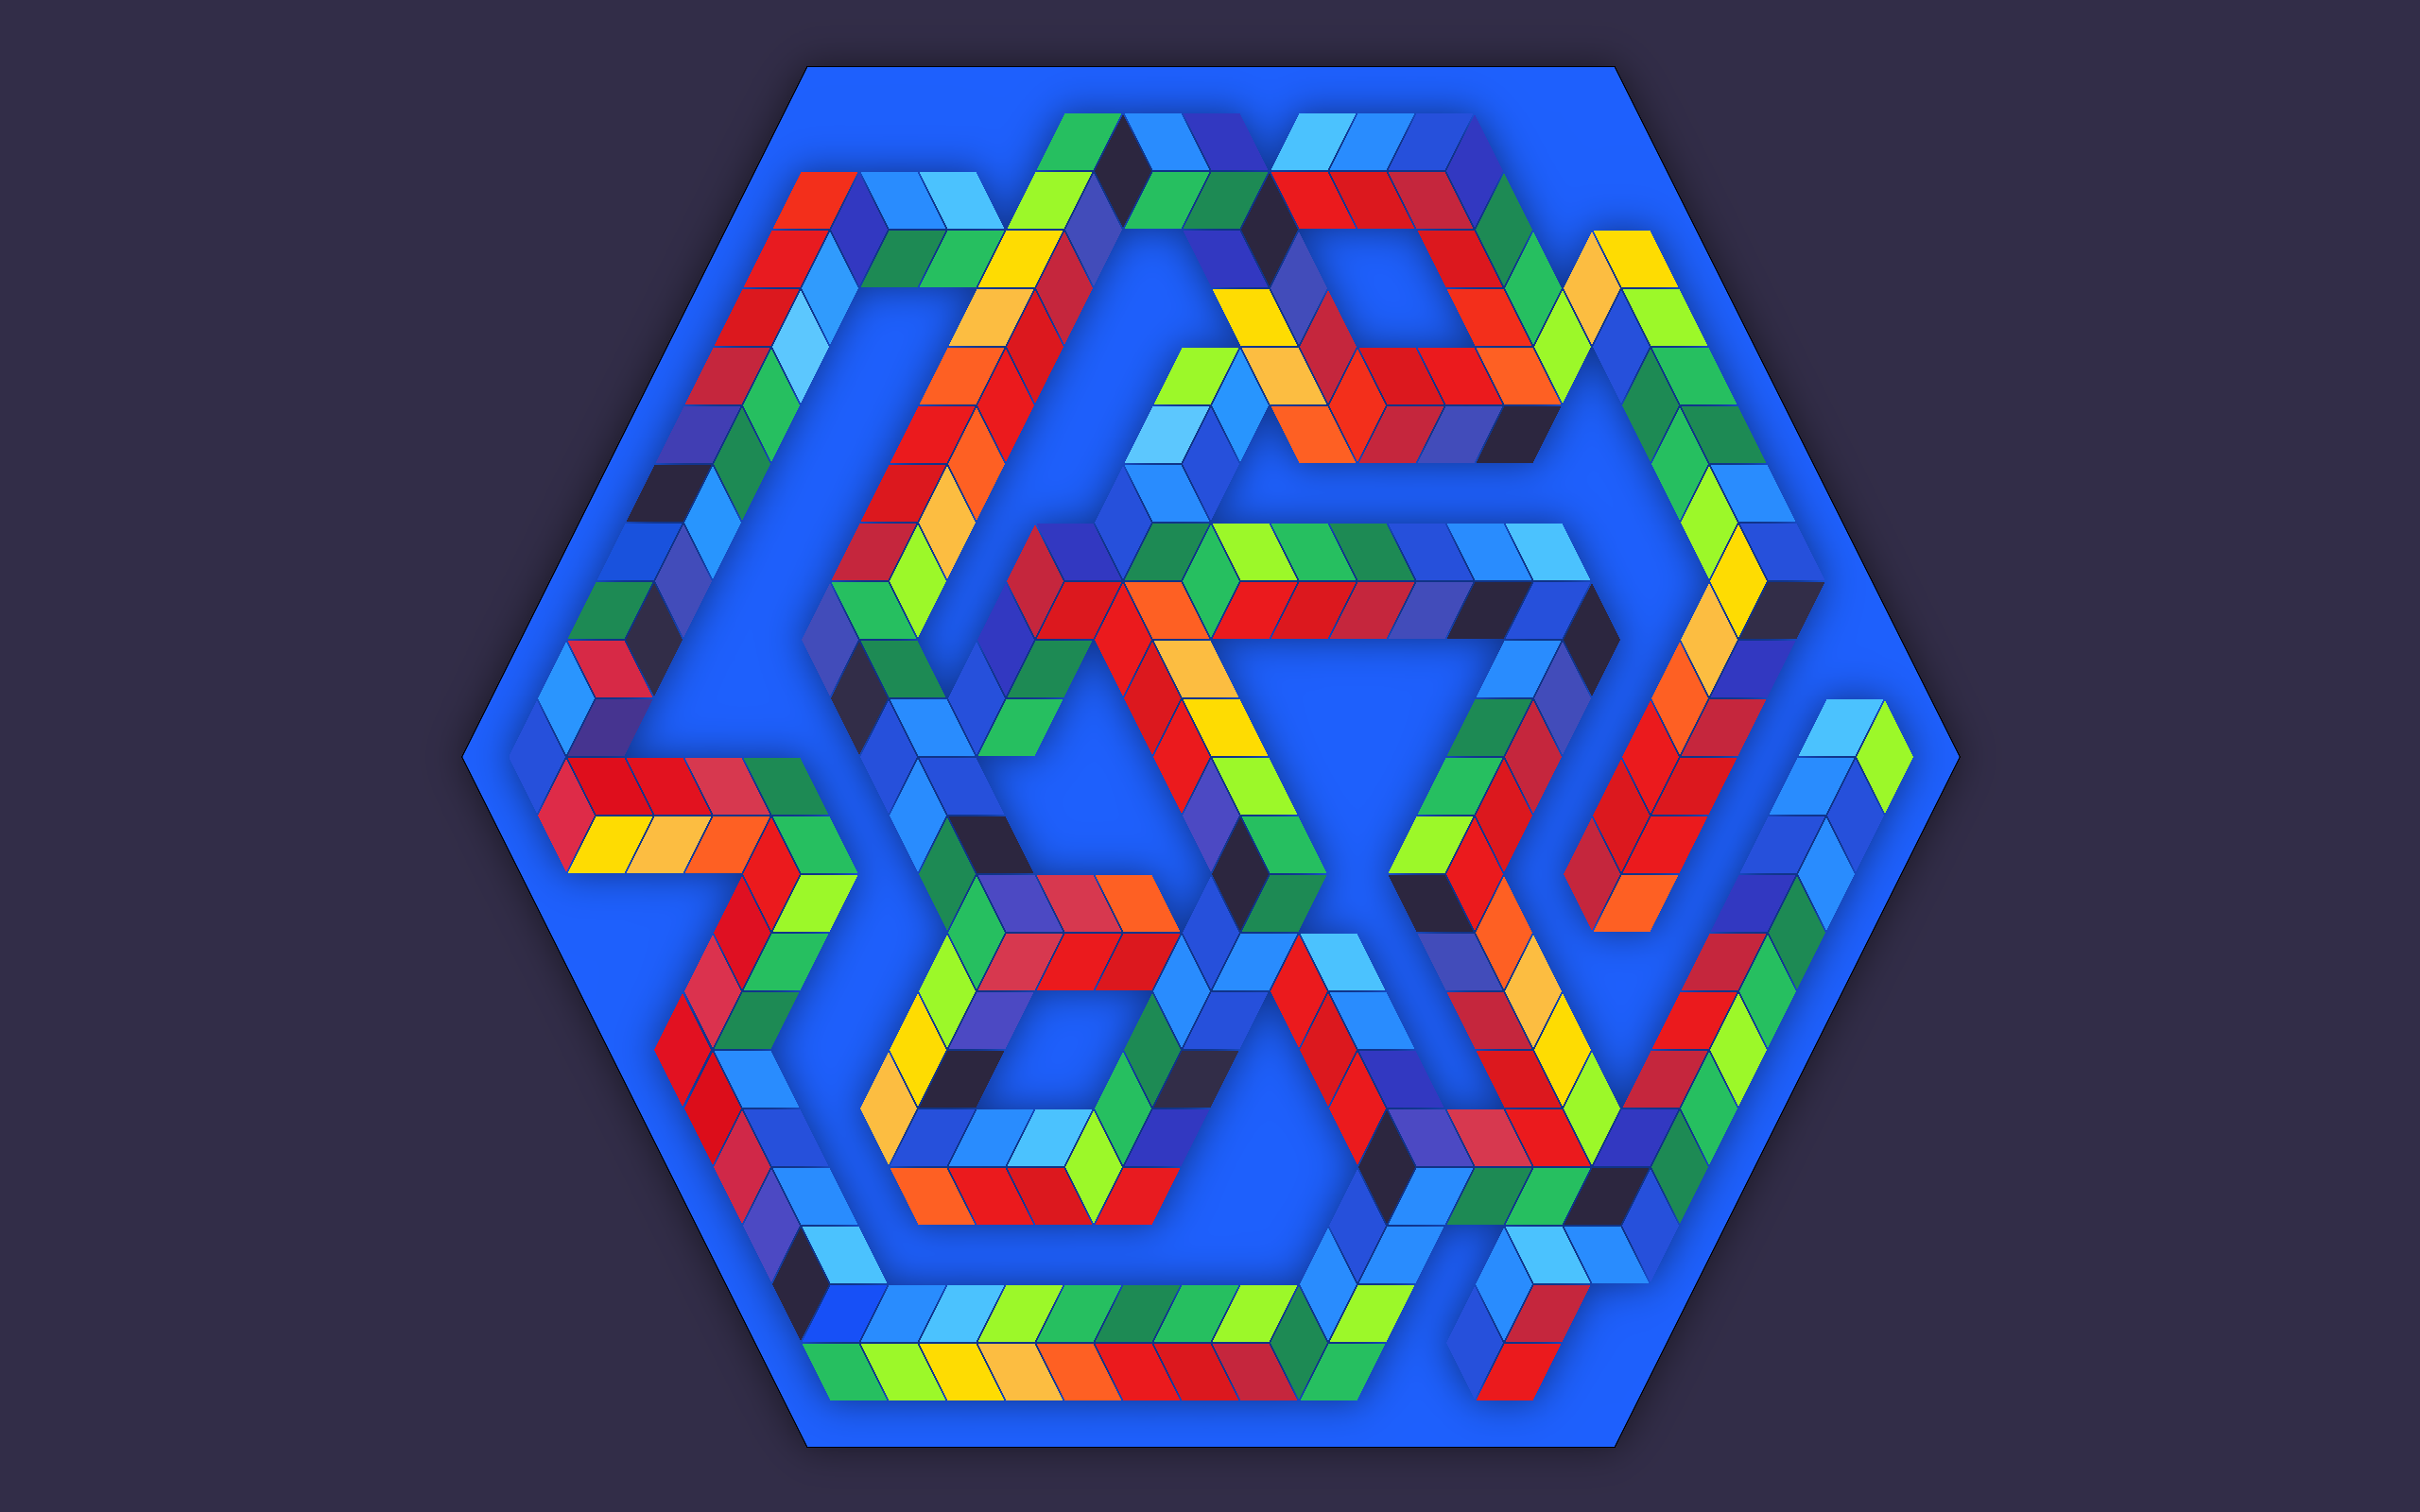 Minimalism Digital Art Cube 3D Blue Hexagon Colorful Simple Background Abstract Optical Illusion 2560x1600